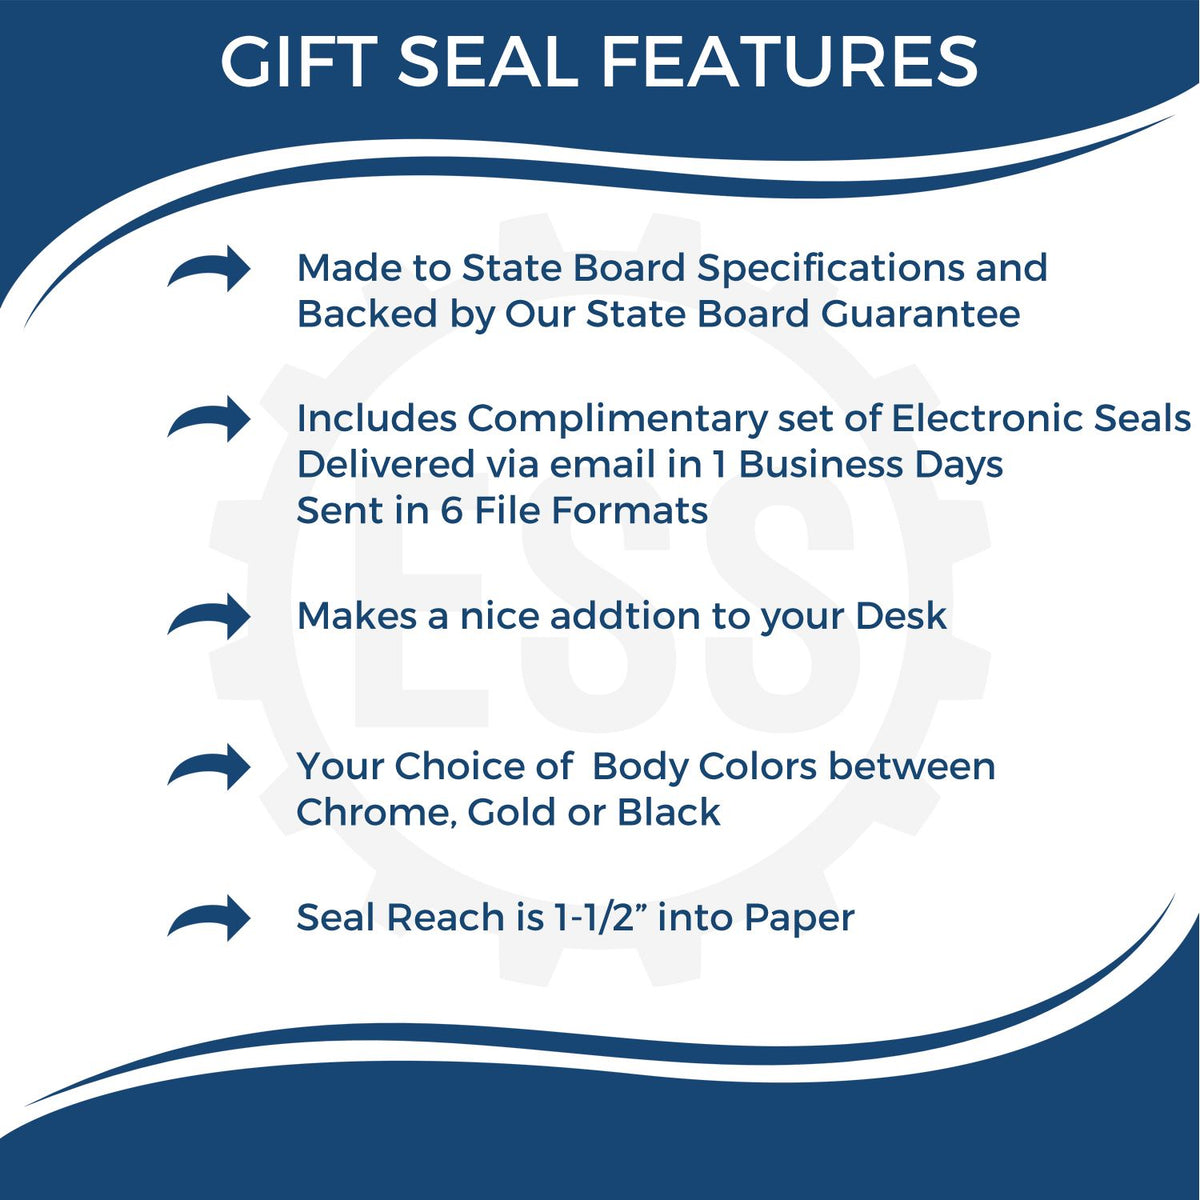 A picture of an infographic highlighting the selling points for the Gift Iowa Engineer Seal